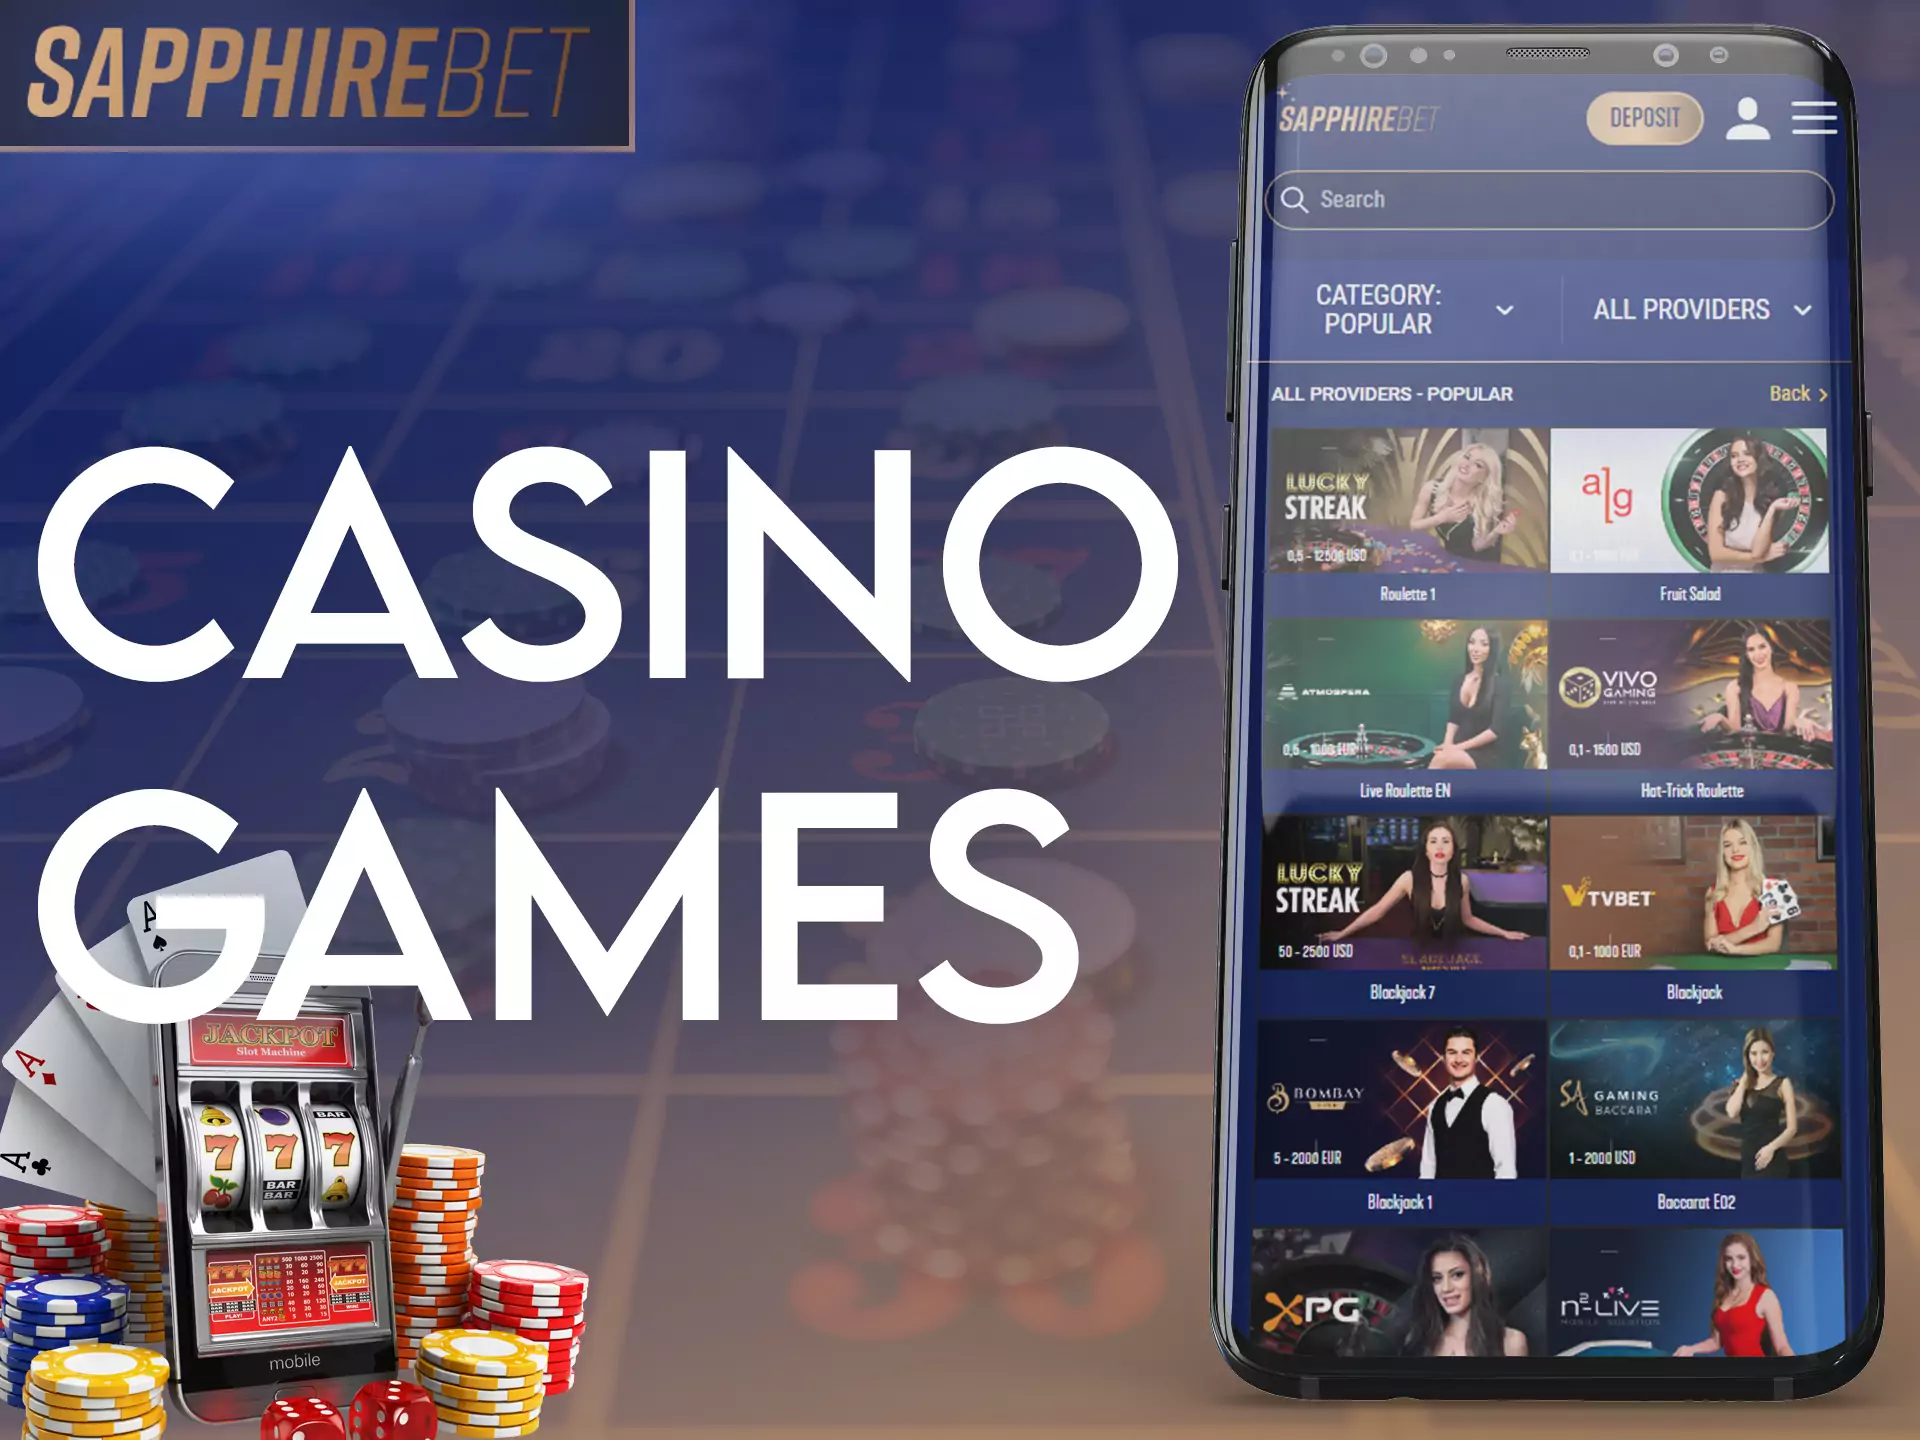 Play different games in the Sapphirebet Casino app.